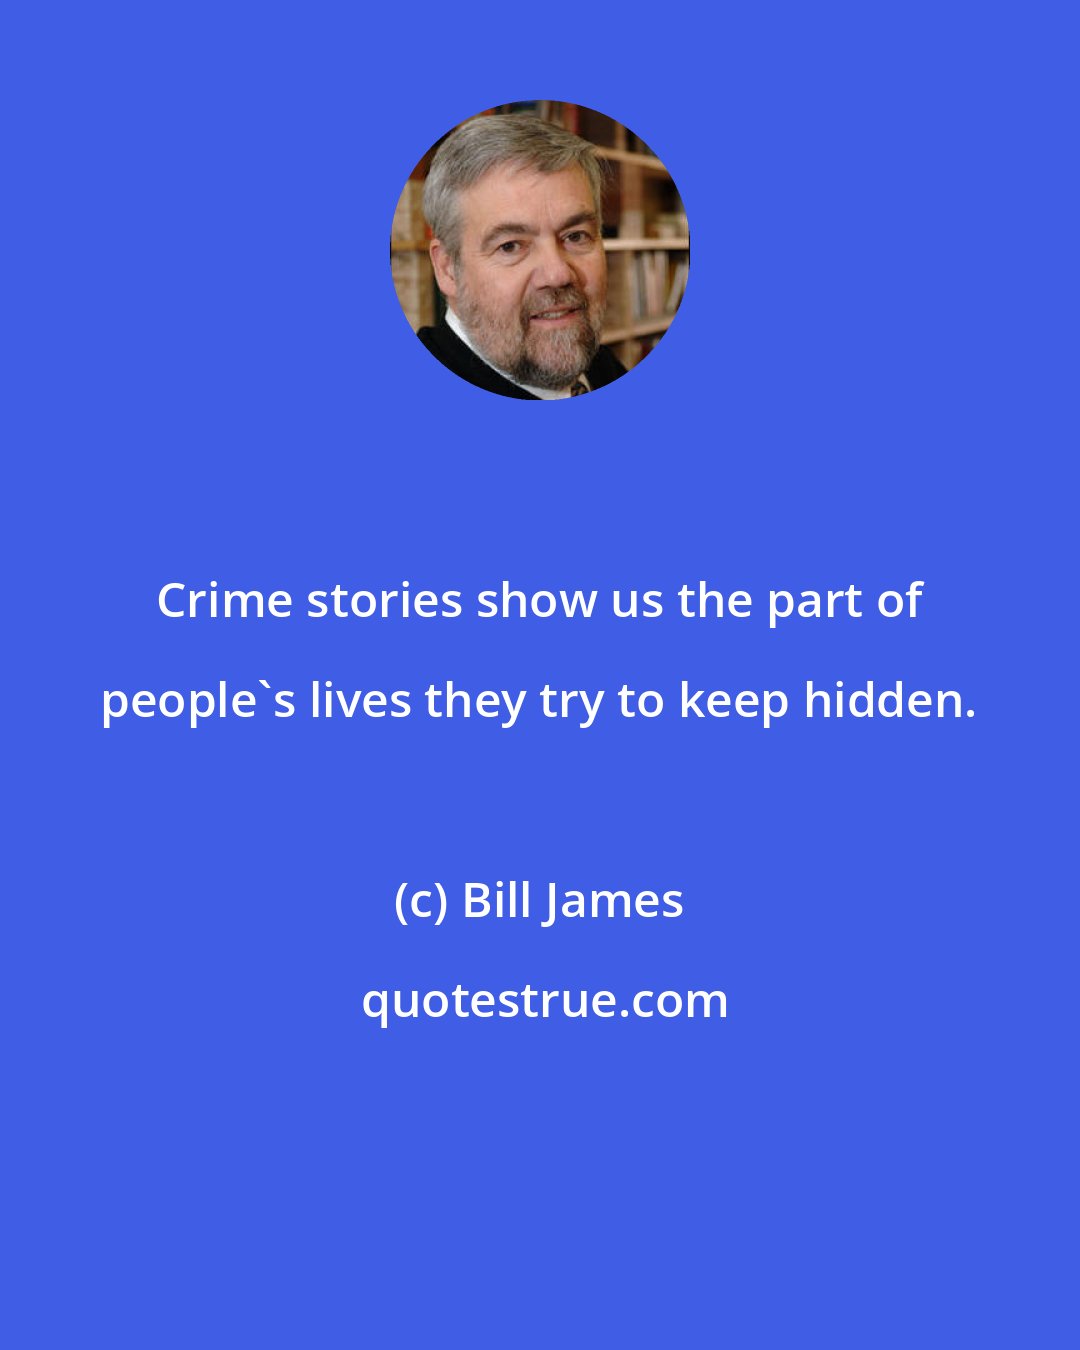 Bill James: Crime stories show us the part of people's lives they try to keep hidden.